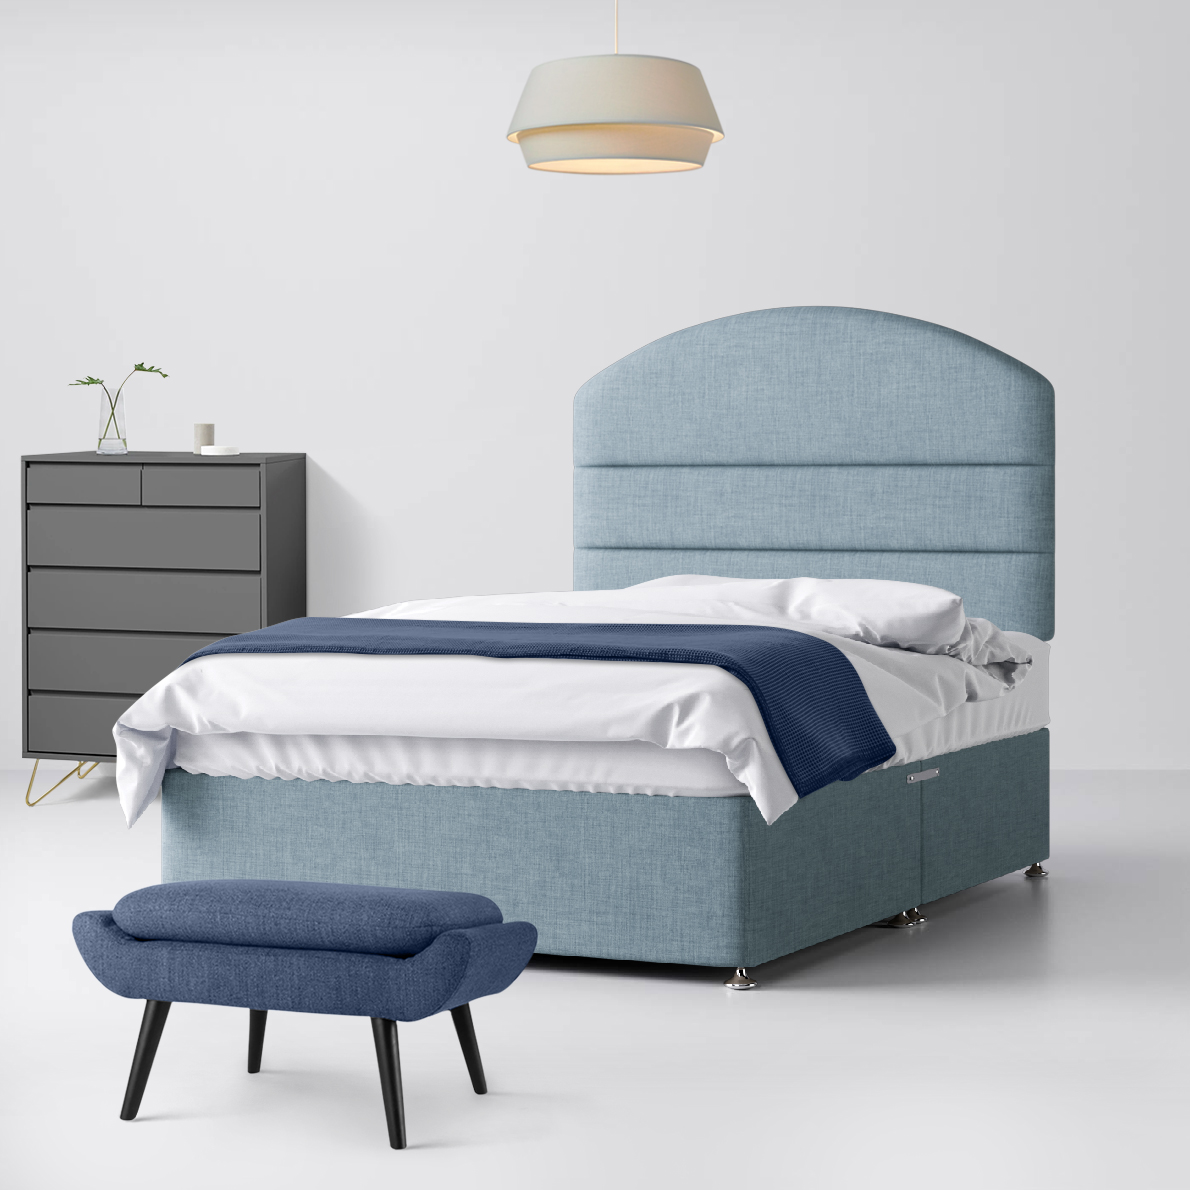 Small Double - Divan Bed and Dudley Lined Headboard - Duck Egg Blue - Fabric - 4ft - Happy Beds